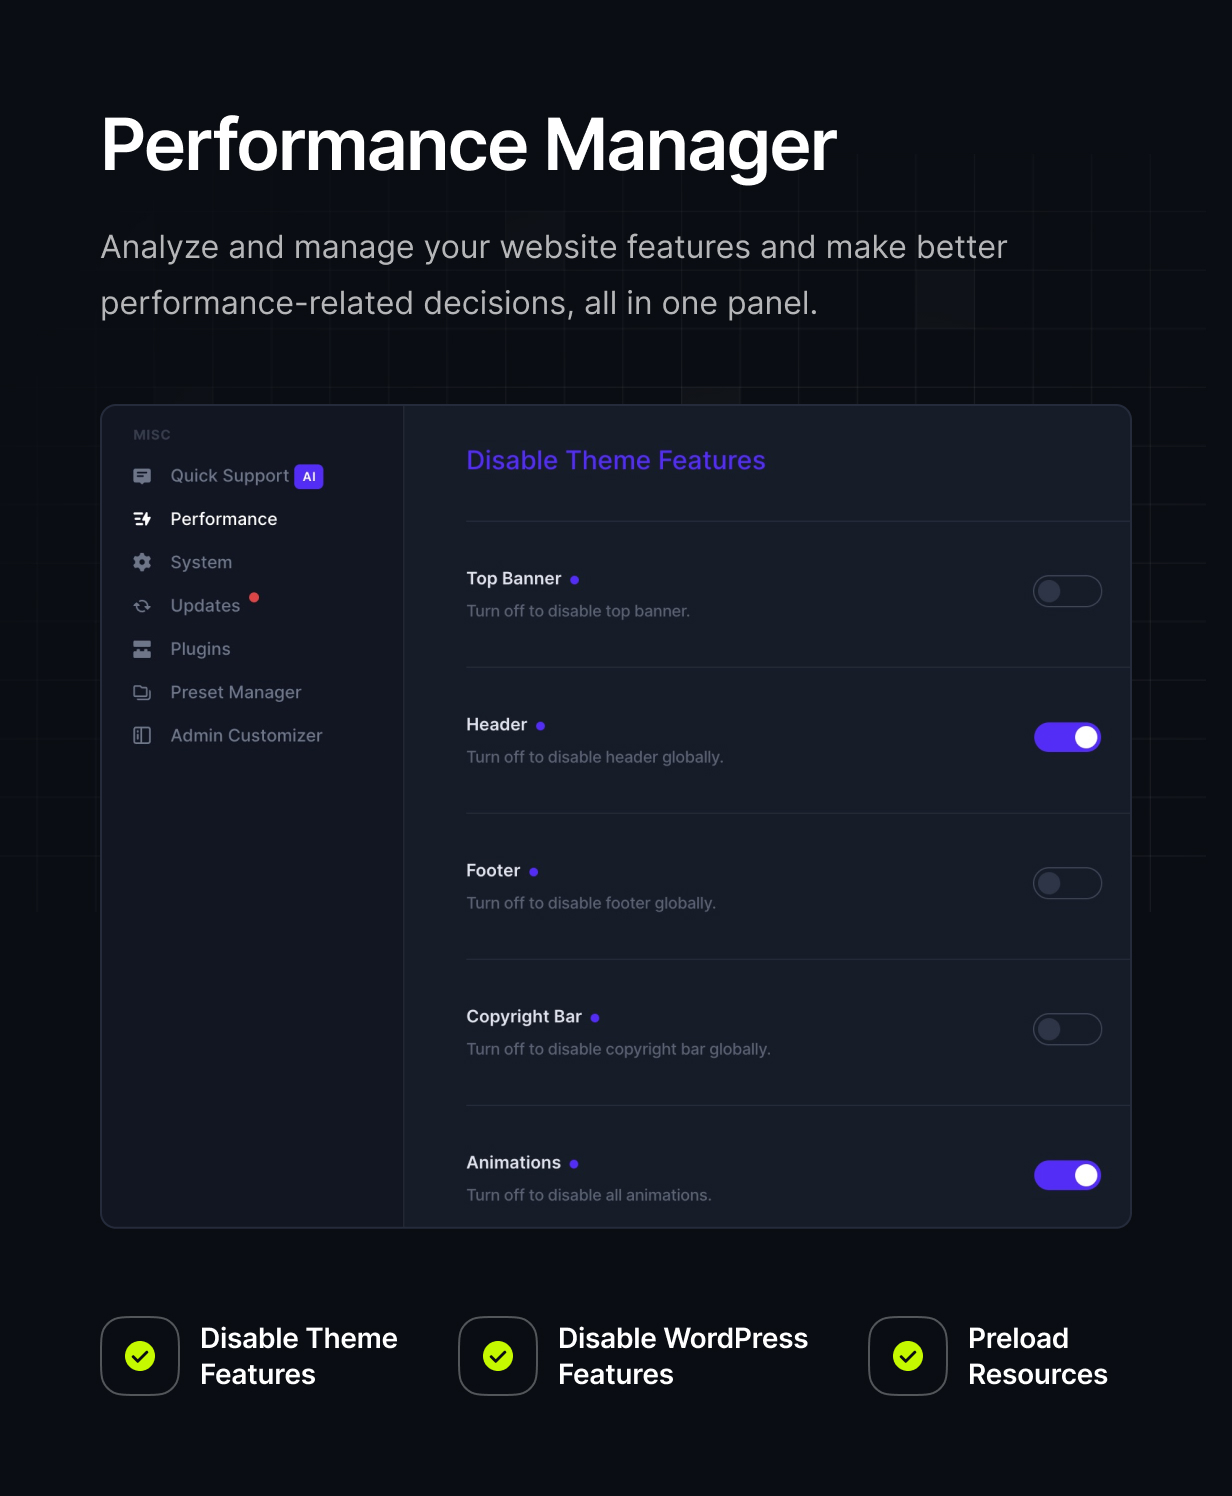 Performance Manager